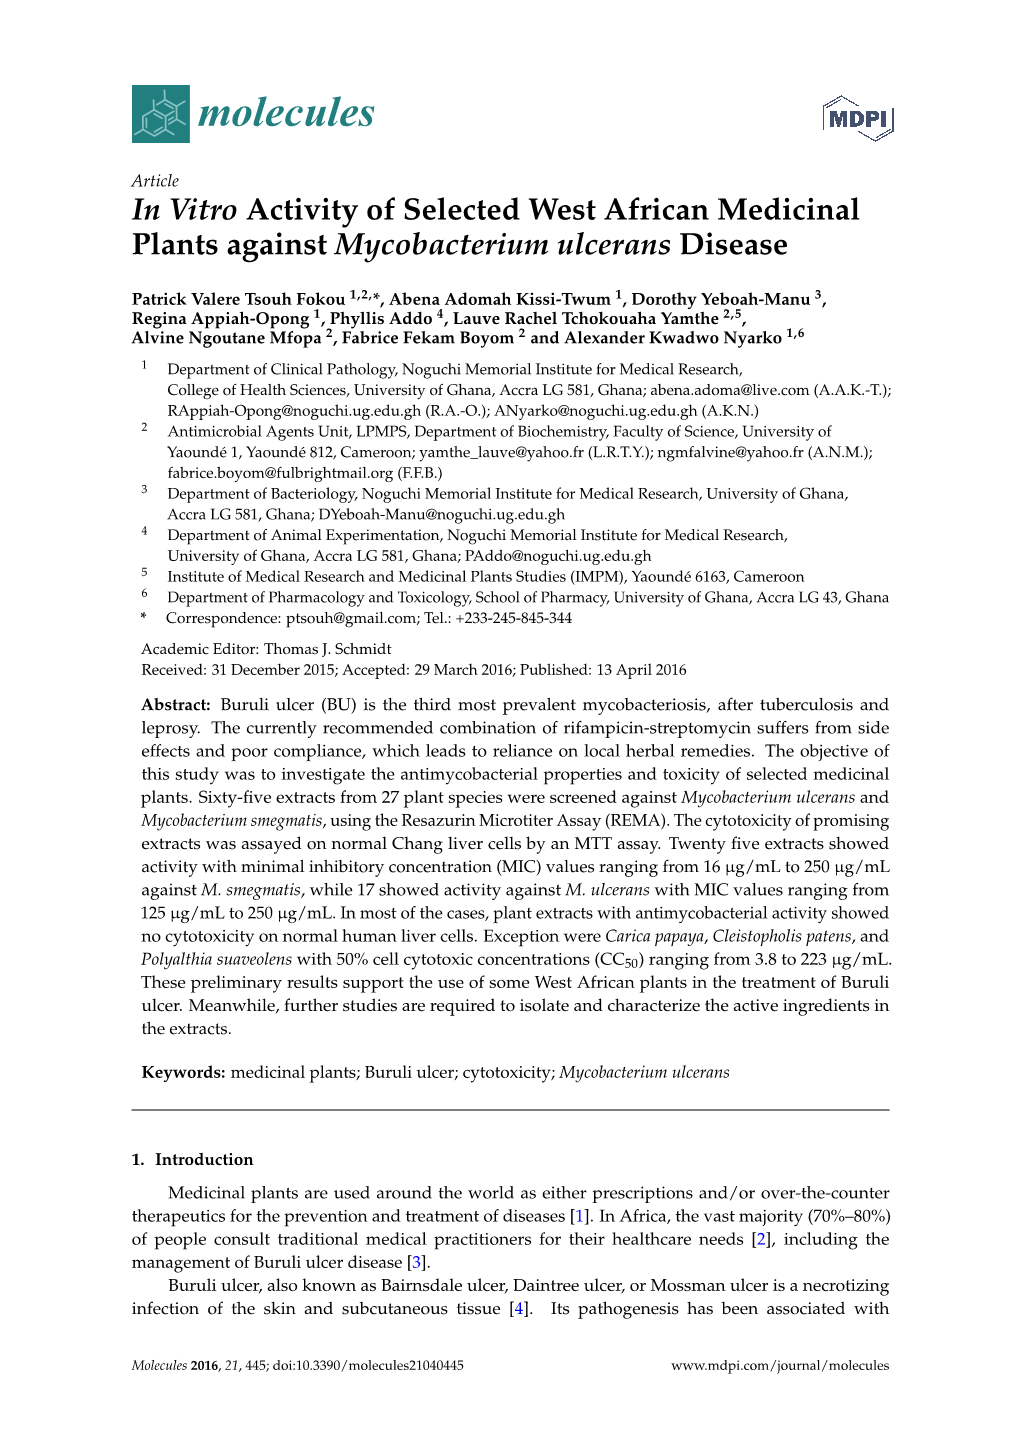 In Vitro Activity of Selected West African Medicinal Plants Against Mycobacterium Ulcerans Disease